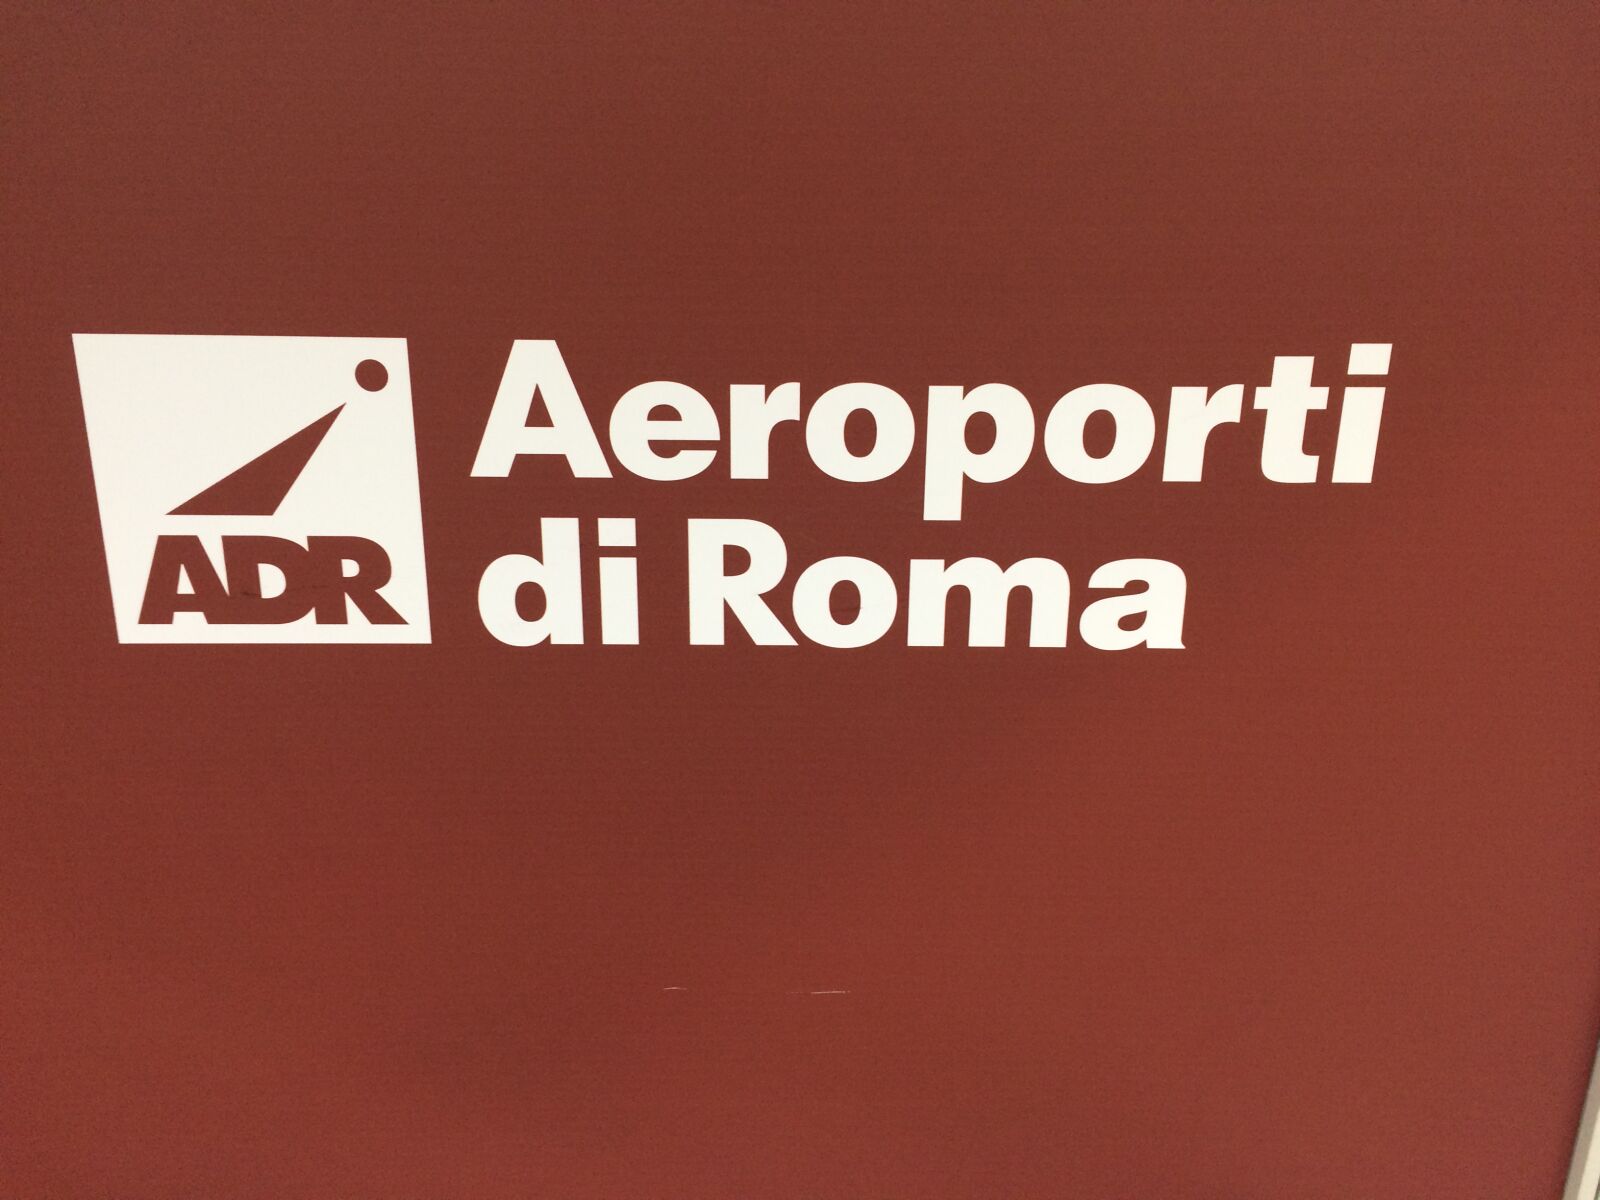 Apple iPhone 5s sample photo. Rome, airport, sign photography